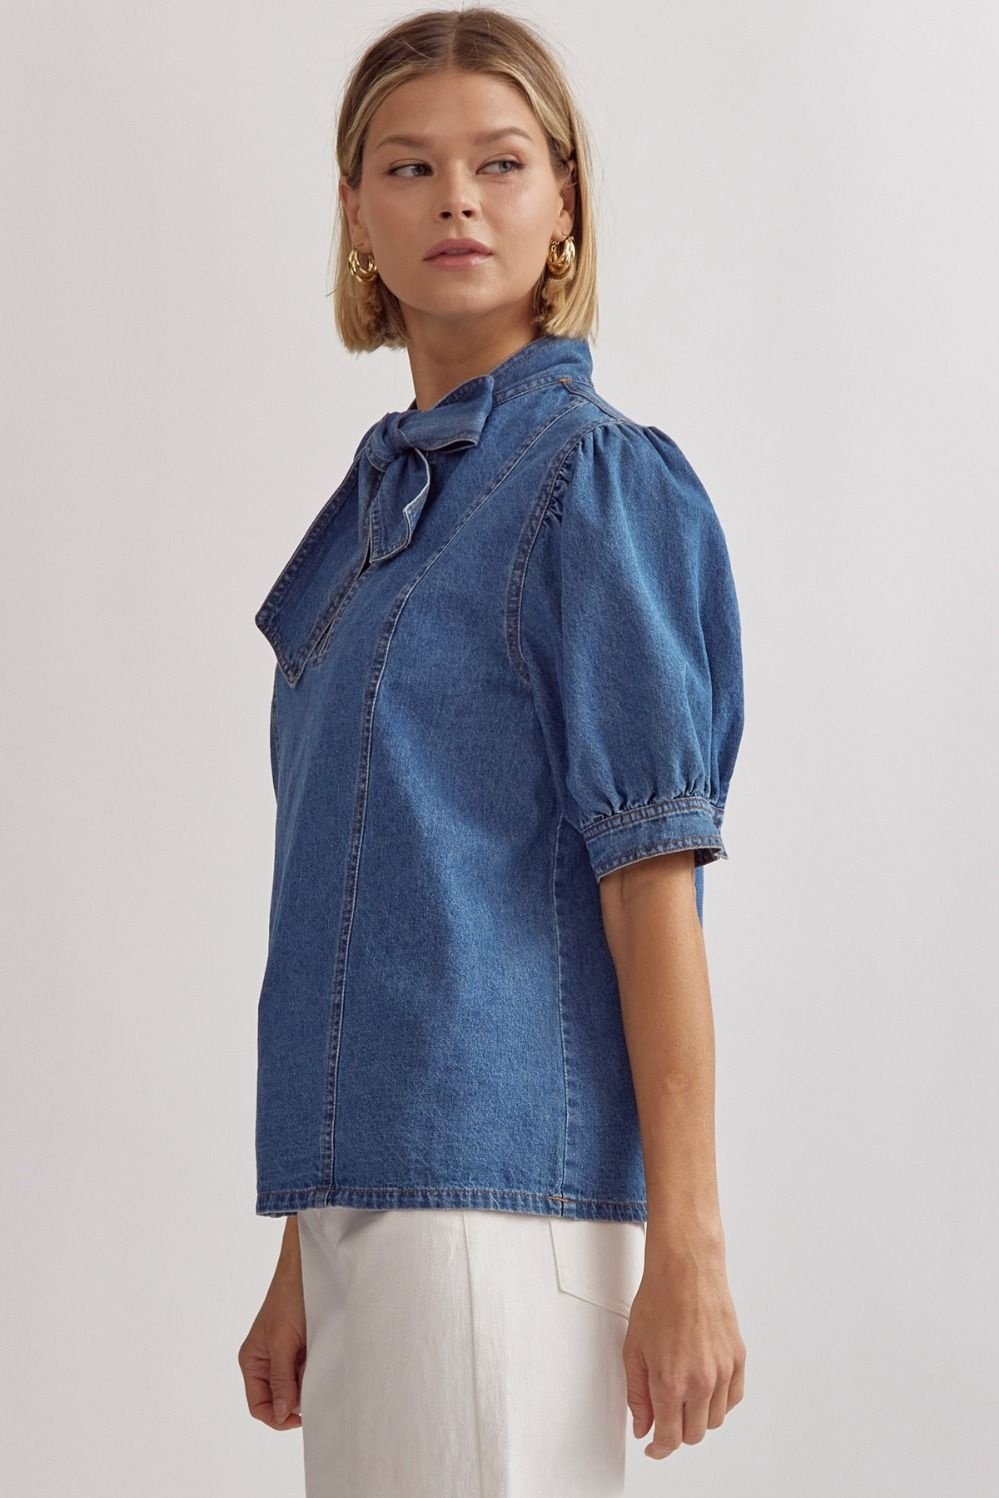 Womens Blouses Women Long Sleeve Denim Shirt Big Bow Back Up Casual Jeans  Blouse Tops Spring Autumn From Xiasapiao, $38.08 | DHgate.Com